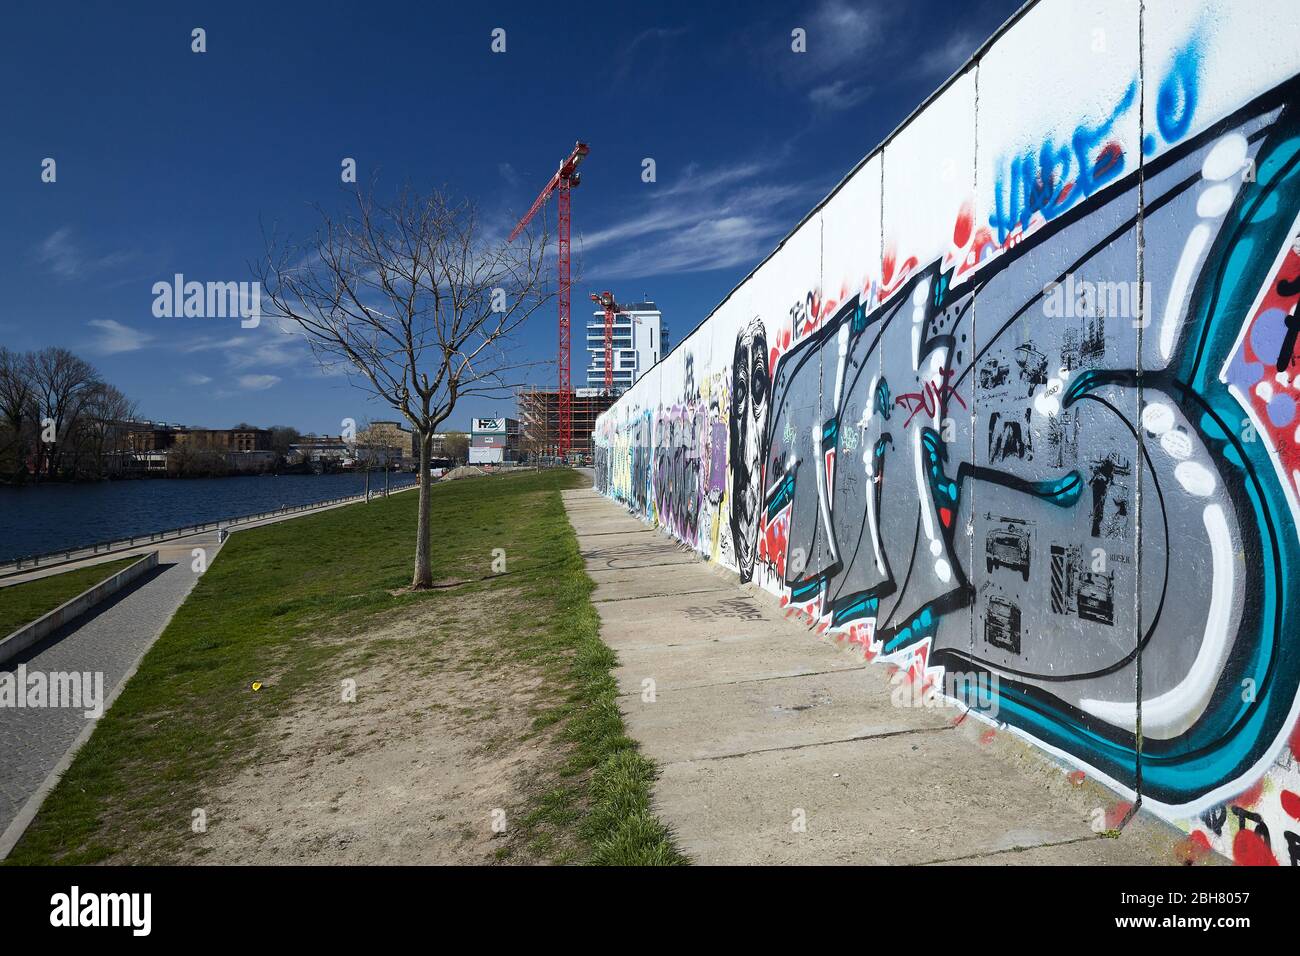 24.03.2020, Berlin, Berlin, Germany - At the East Side Gallery in Berlin-Friedrichshain. On the left a part of the former Berlin Wall, which was moved Stock Photo